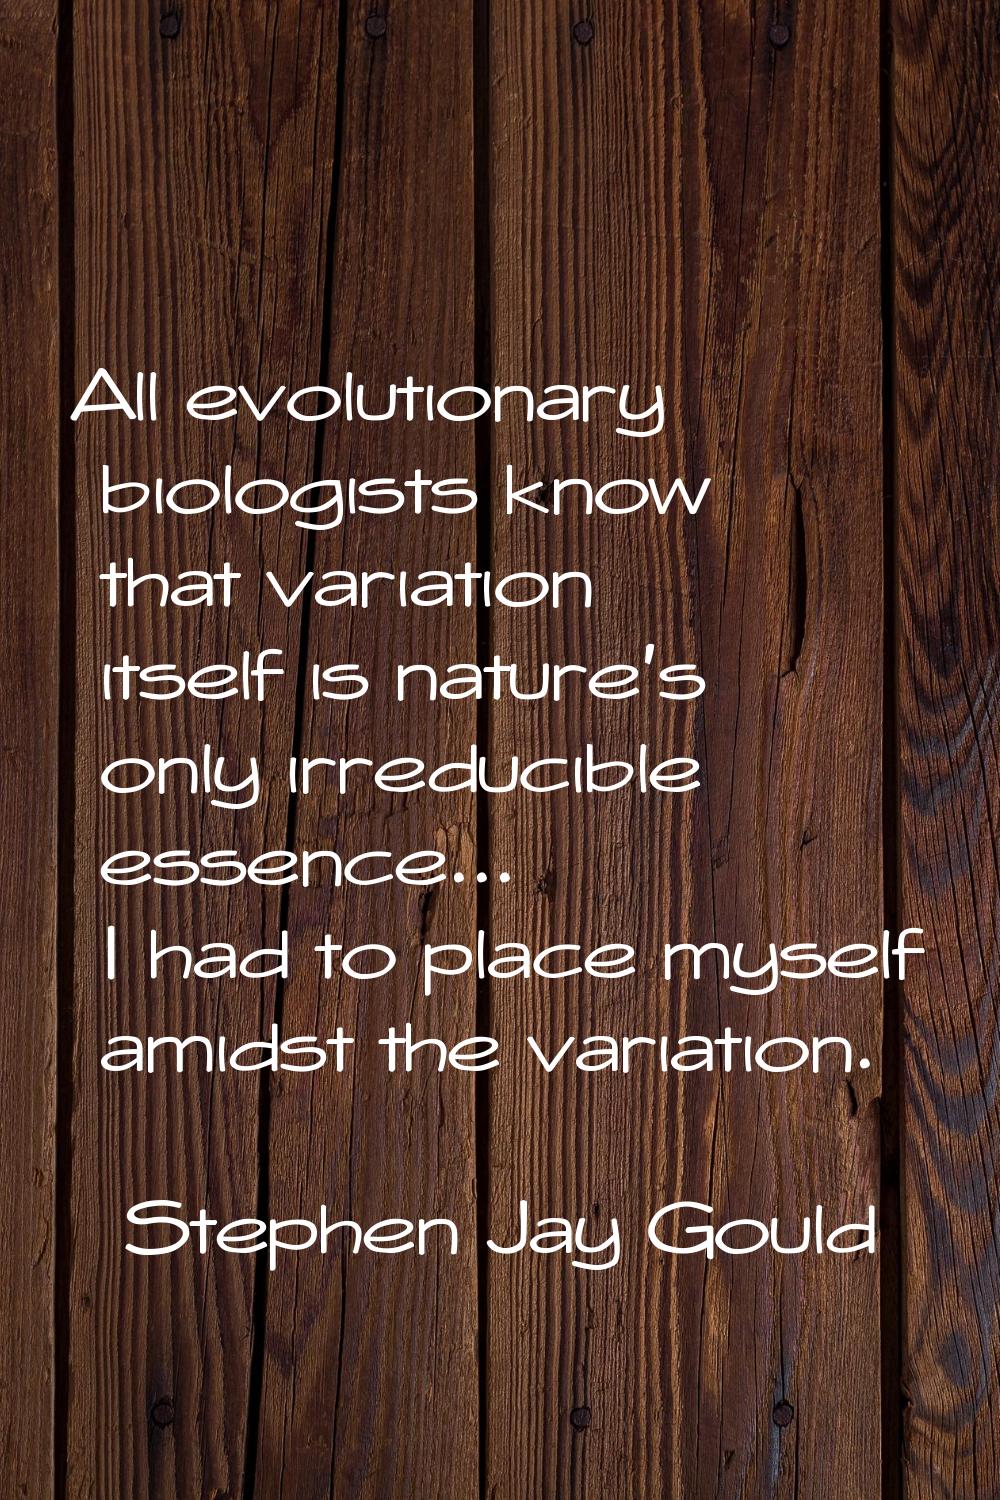 All evolutionary biologists know that variation itself is nature's only irreducible essence... I ha